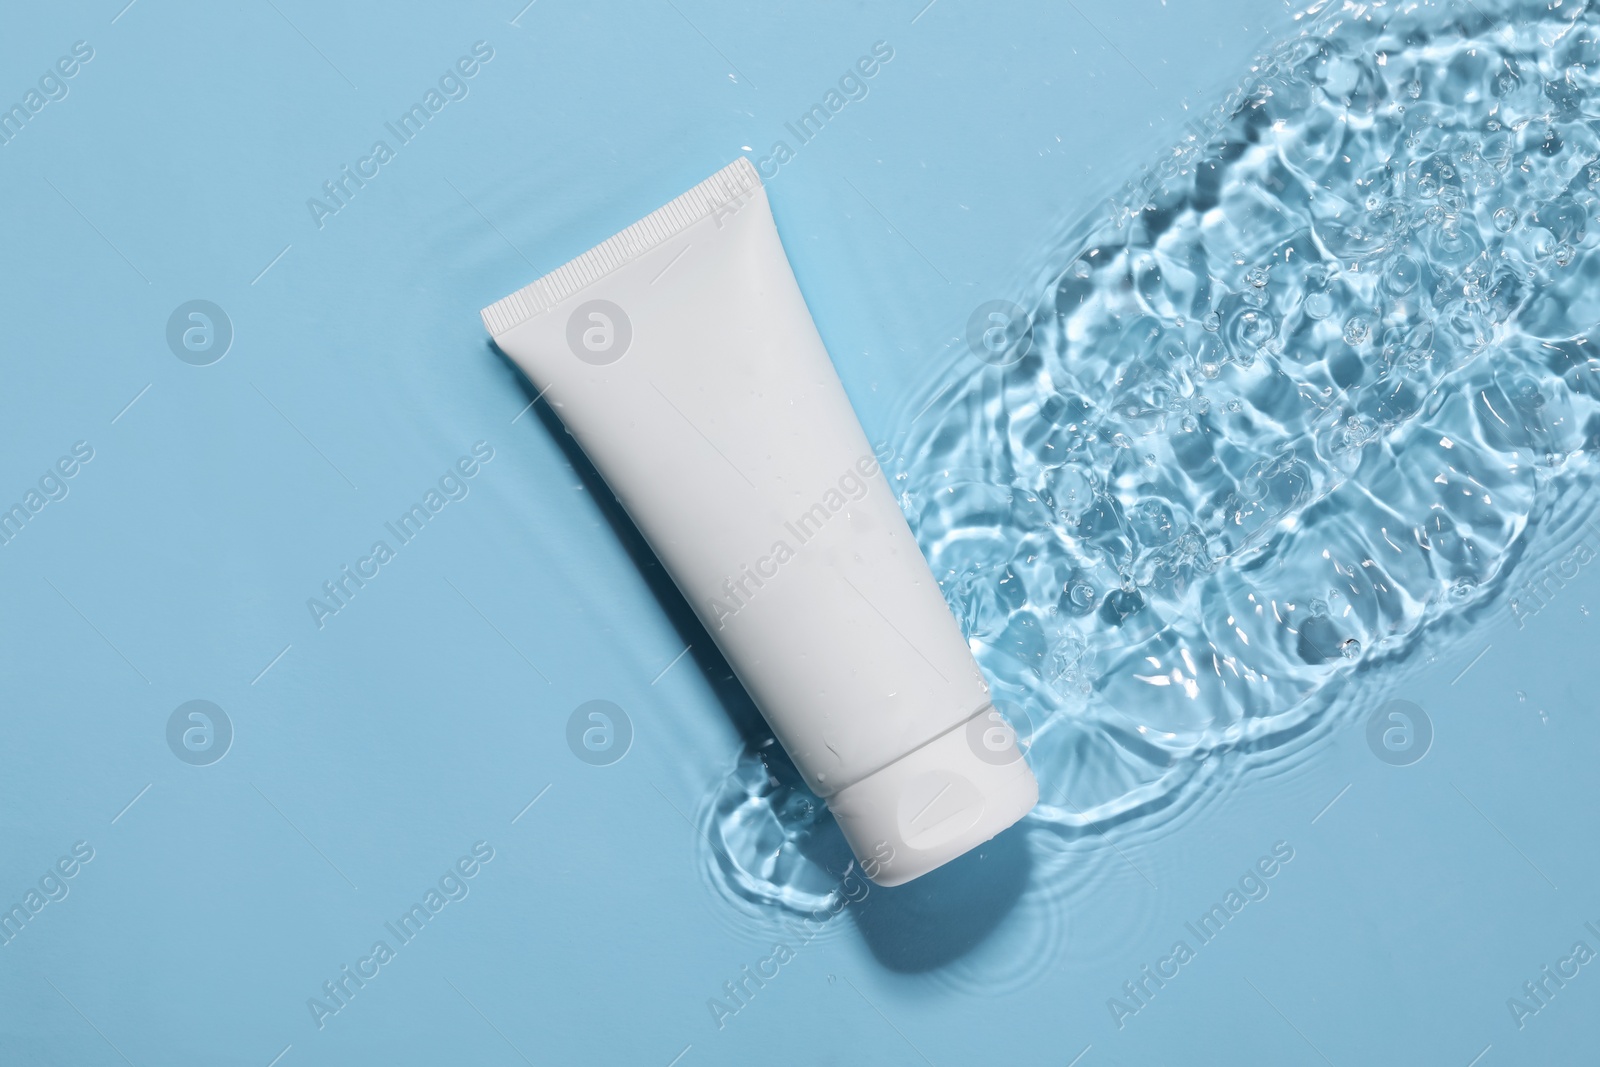 Photo of Tube of face cleansing product in water against light blue background, top view